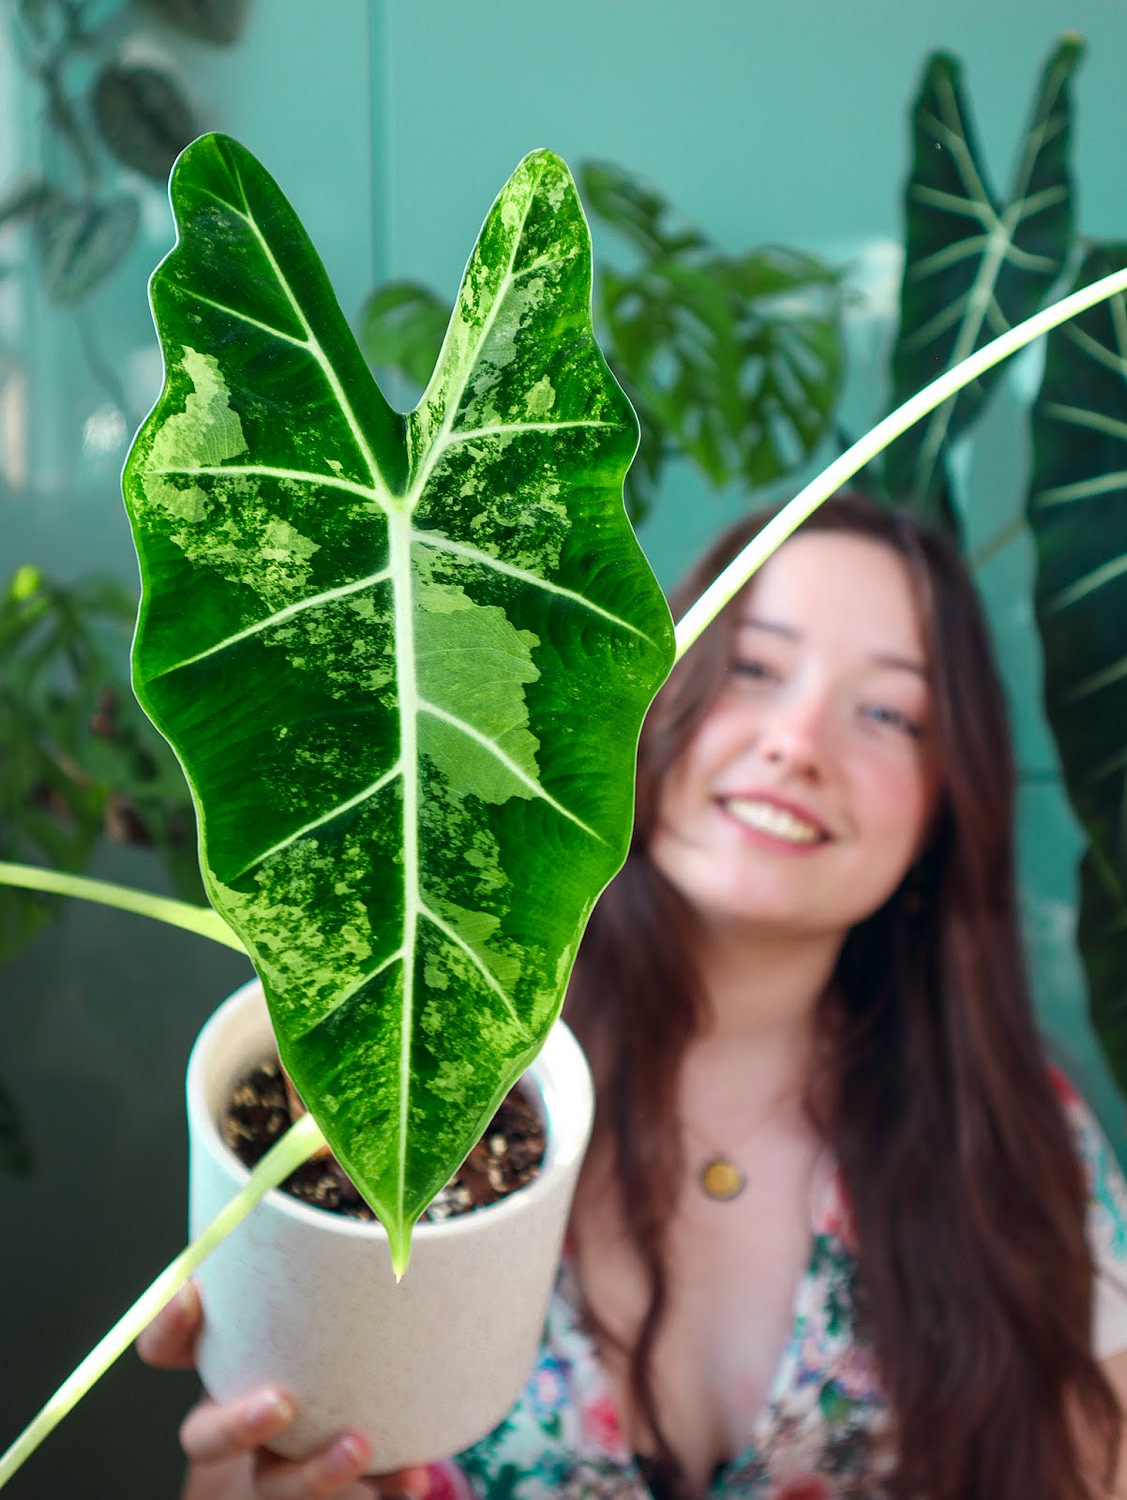 The most expensive plant in the offer: Alocasia Frydek 385€